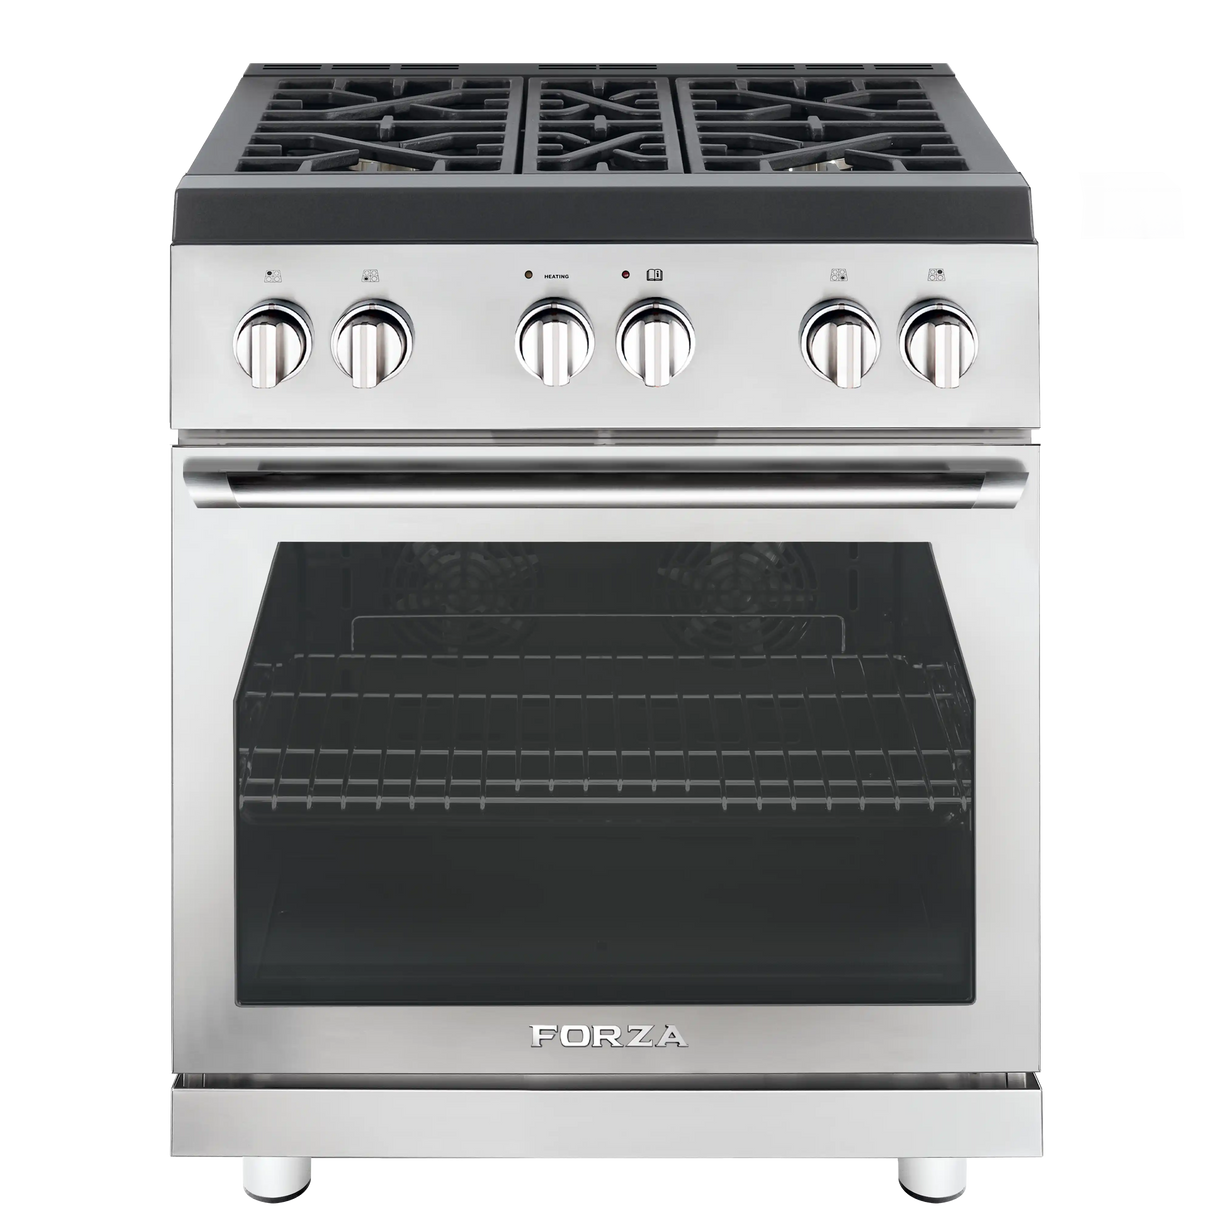 Forza 3-Piece Appliance Package - 30-Inch Gas Range, 18-Inch Pro-Style Under Cabinet Range Hood, & 24-Inch Dishwasher in Stainless Steel